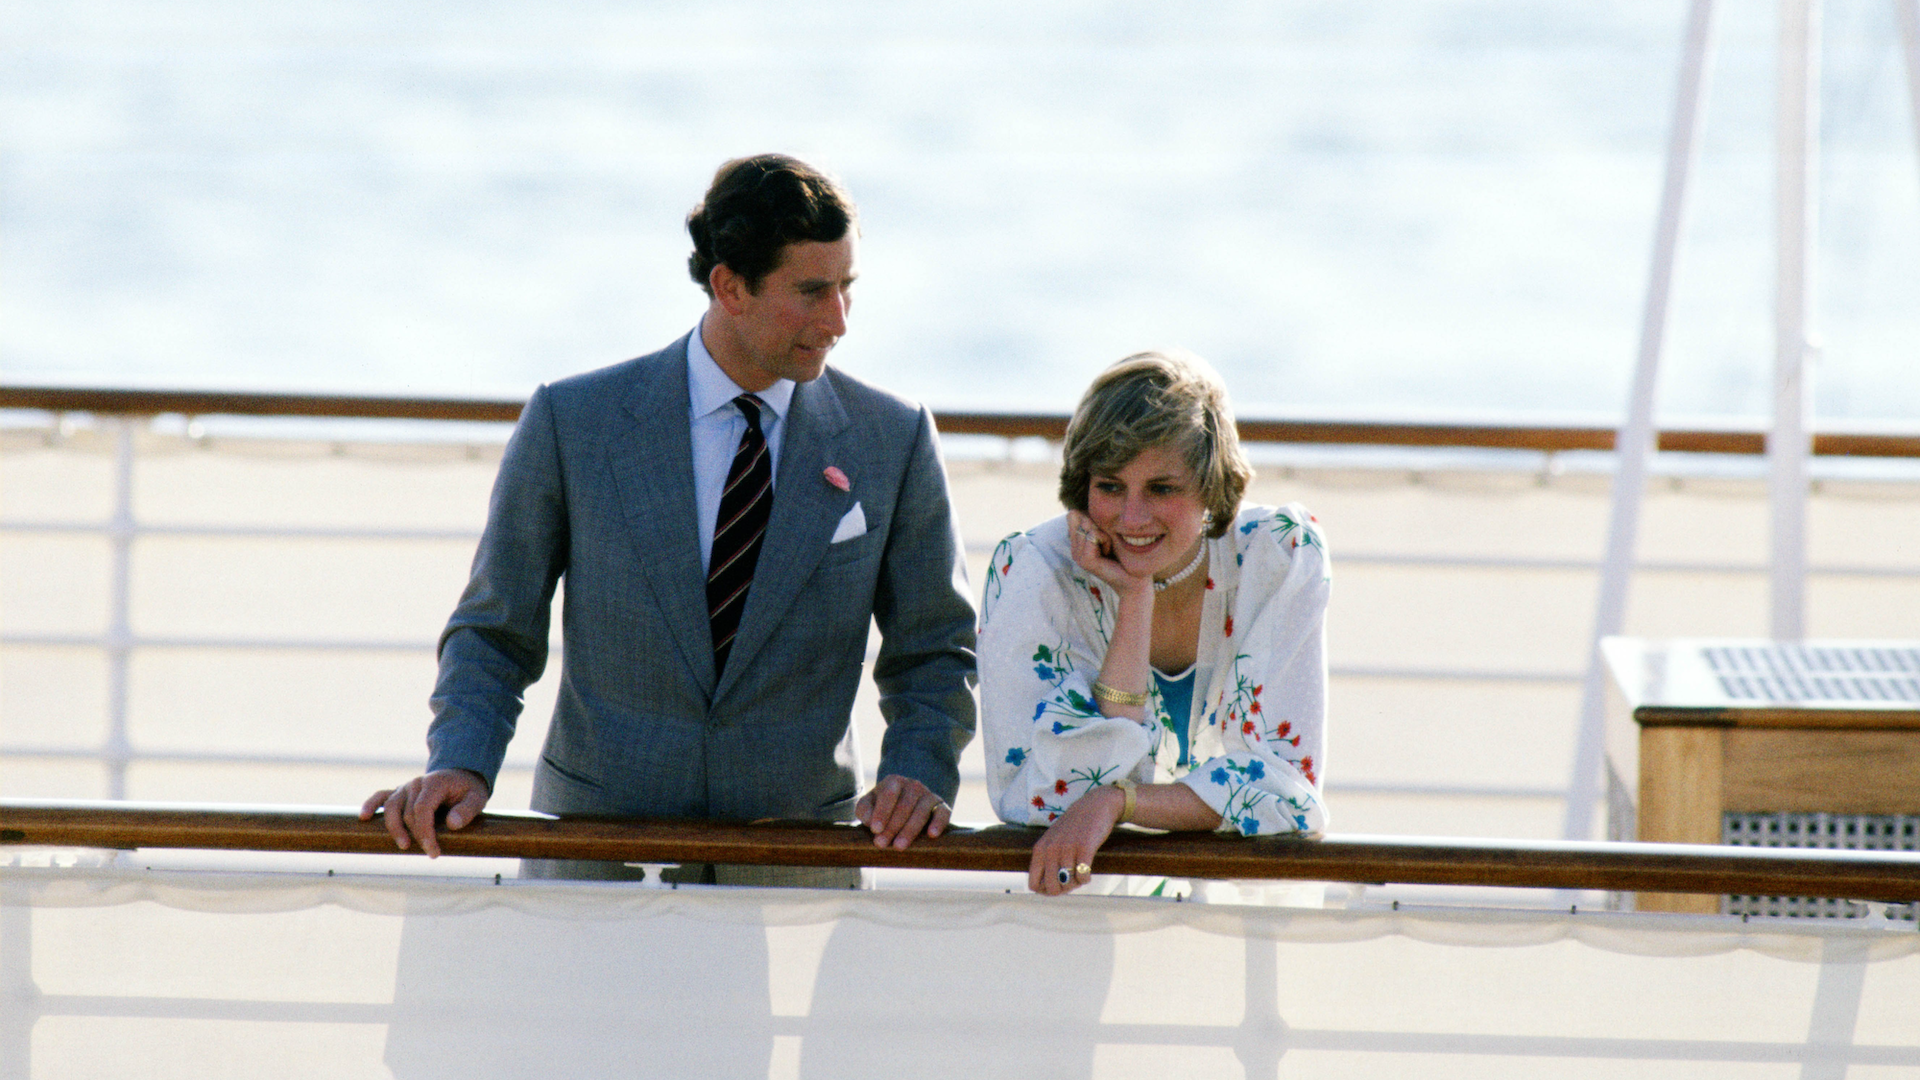 <p>                     To kickstart their three-month-long honeymoon in 1981, Prince Charles and Princess Diana boarded the Royal Yacht Britannia in Gibraltar - a British Overseas Territory, located on the tip of Spain. The Mediterranean cruise provided an opportunity, according to the royal bride, to catch up on sleep after all the wedding celebrations.                   </p>